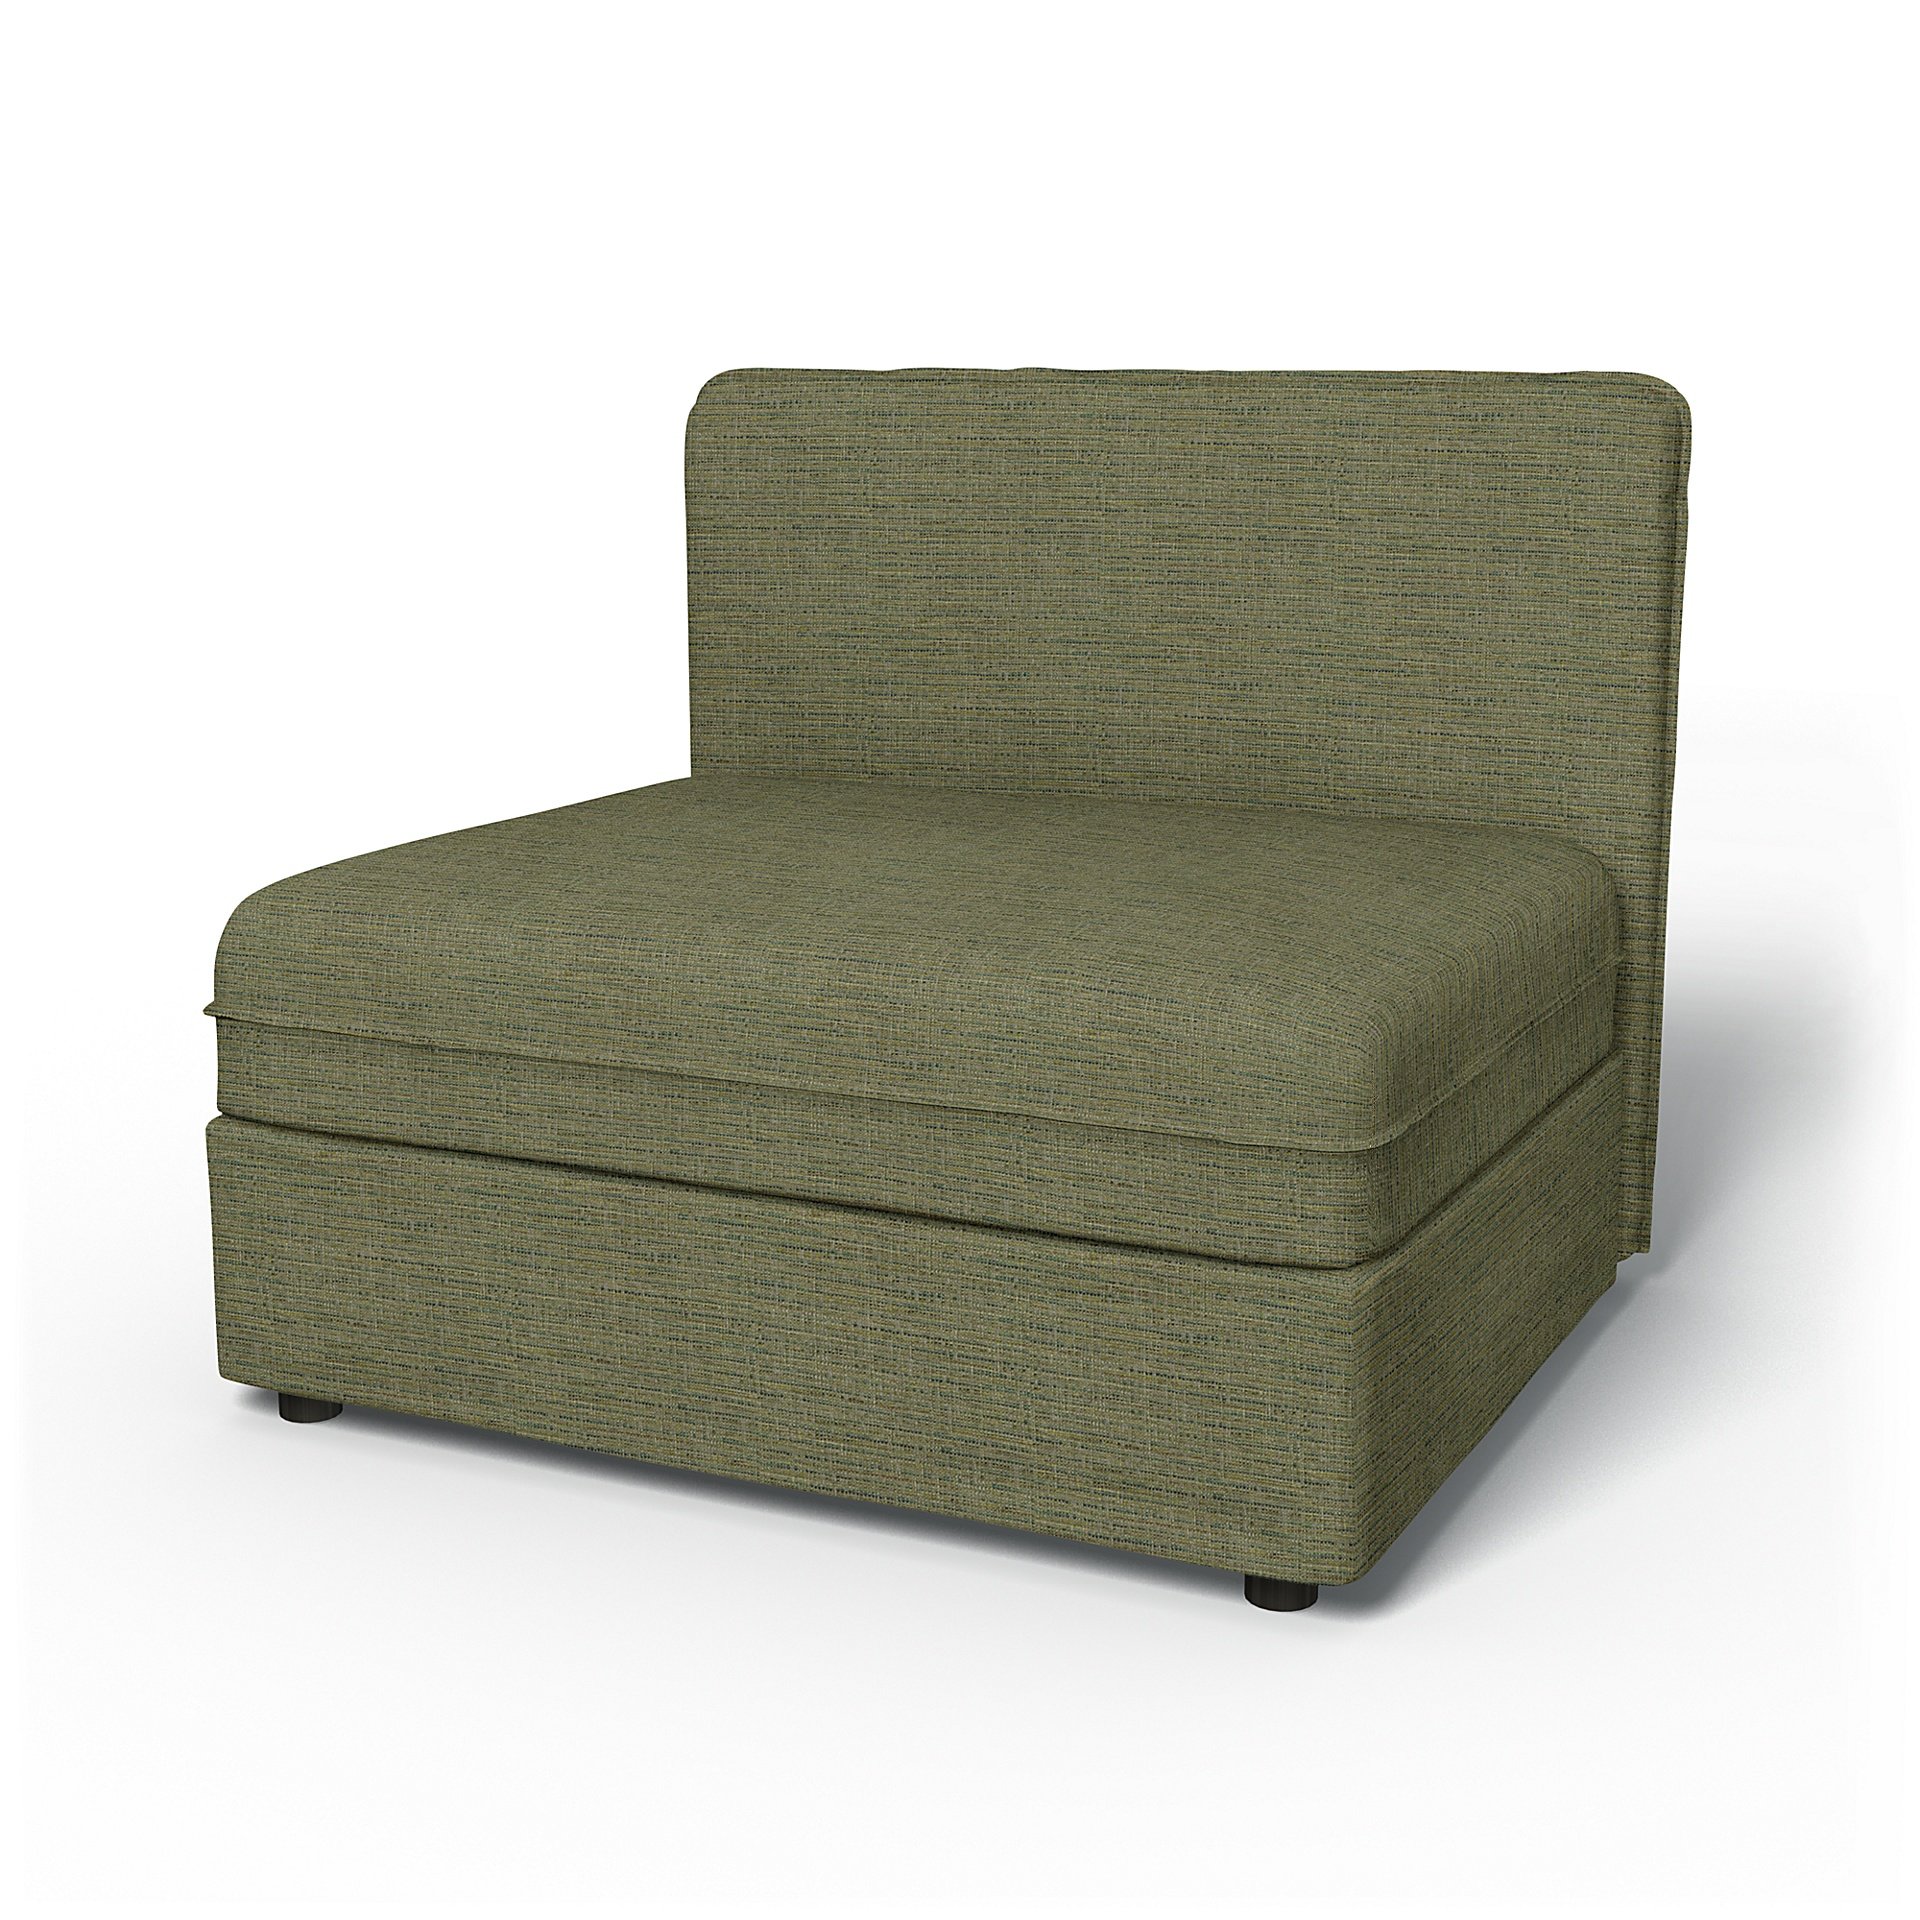 IKEA - Vallentuna Seat Module with Low Back Cover 100x80cm 39x32in, Meadow Green, Boucle & Texture -